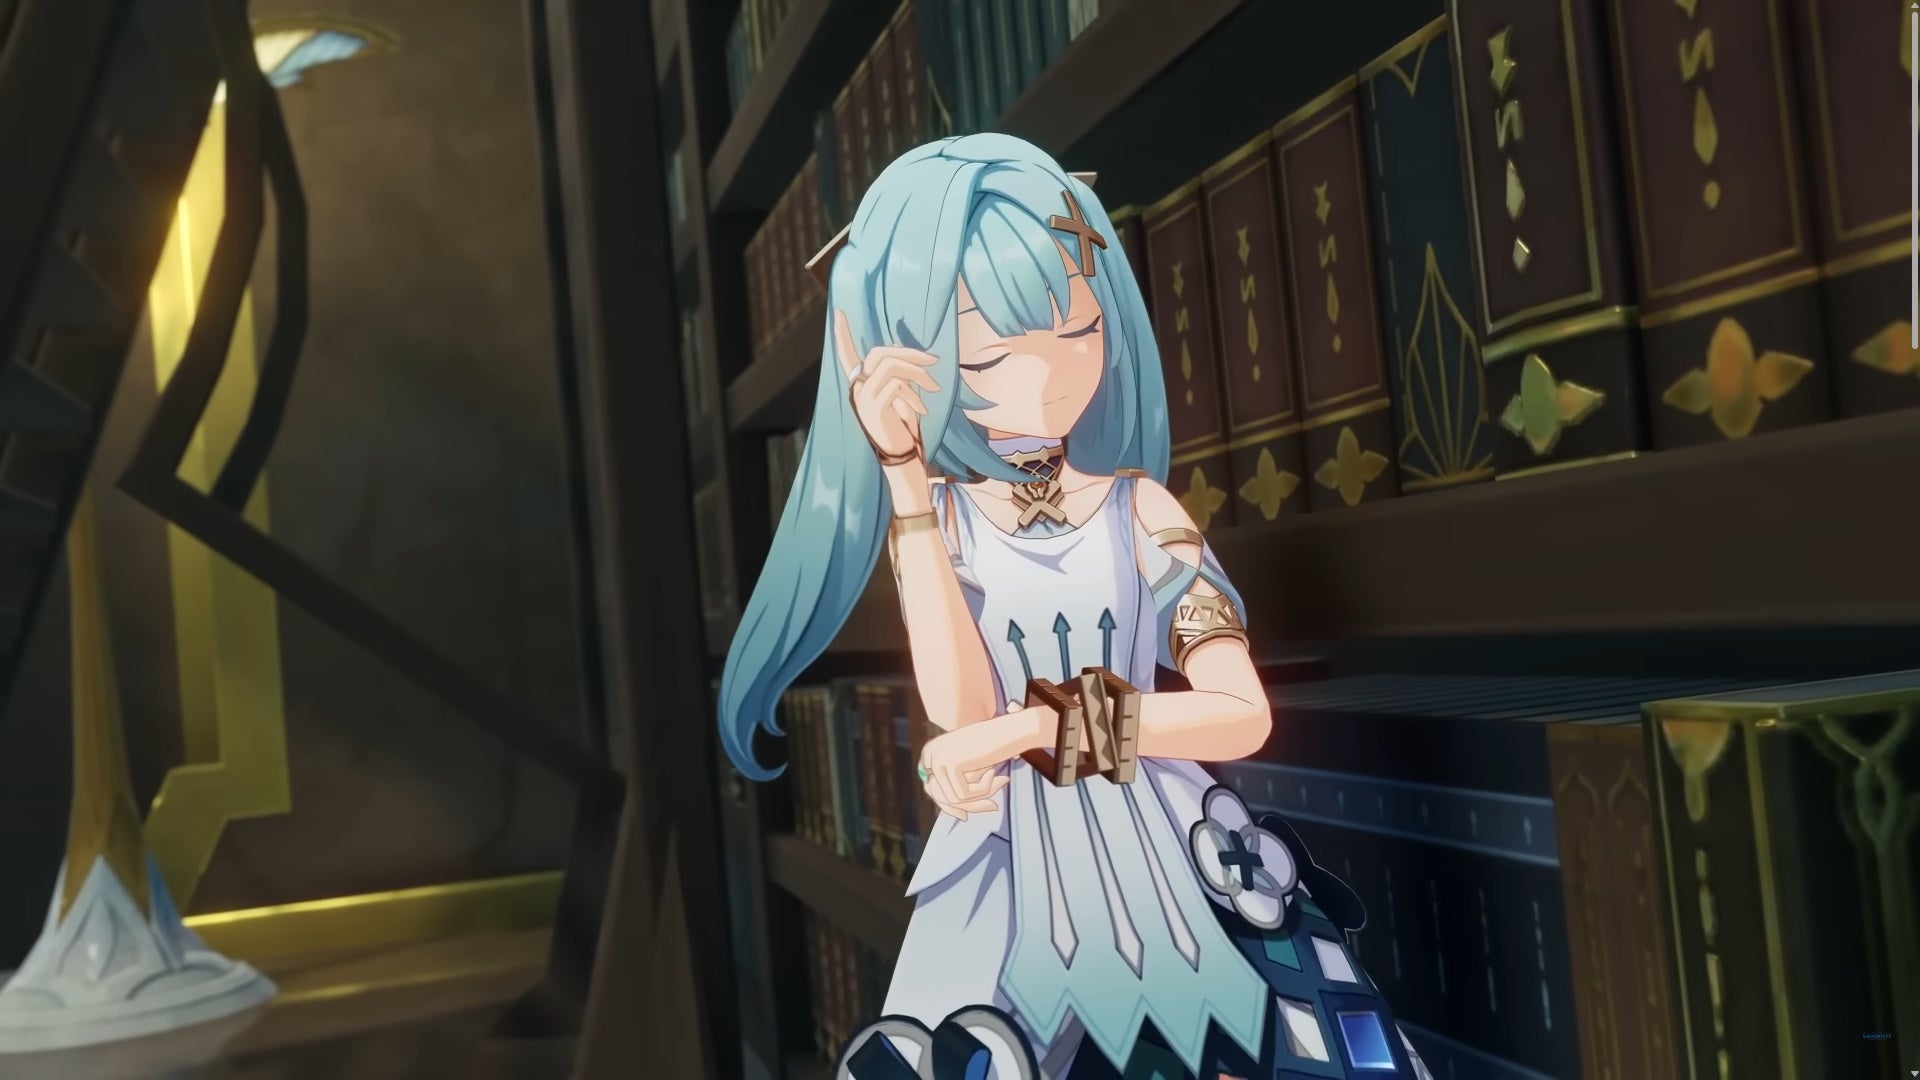 Genshin Faruzan teams: An anime girl in a white dress and with blue pigtails stands near a large bookcase with thick tomes in blue and red binding. Her eyes are closed, and she's tapping her head with one finger